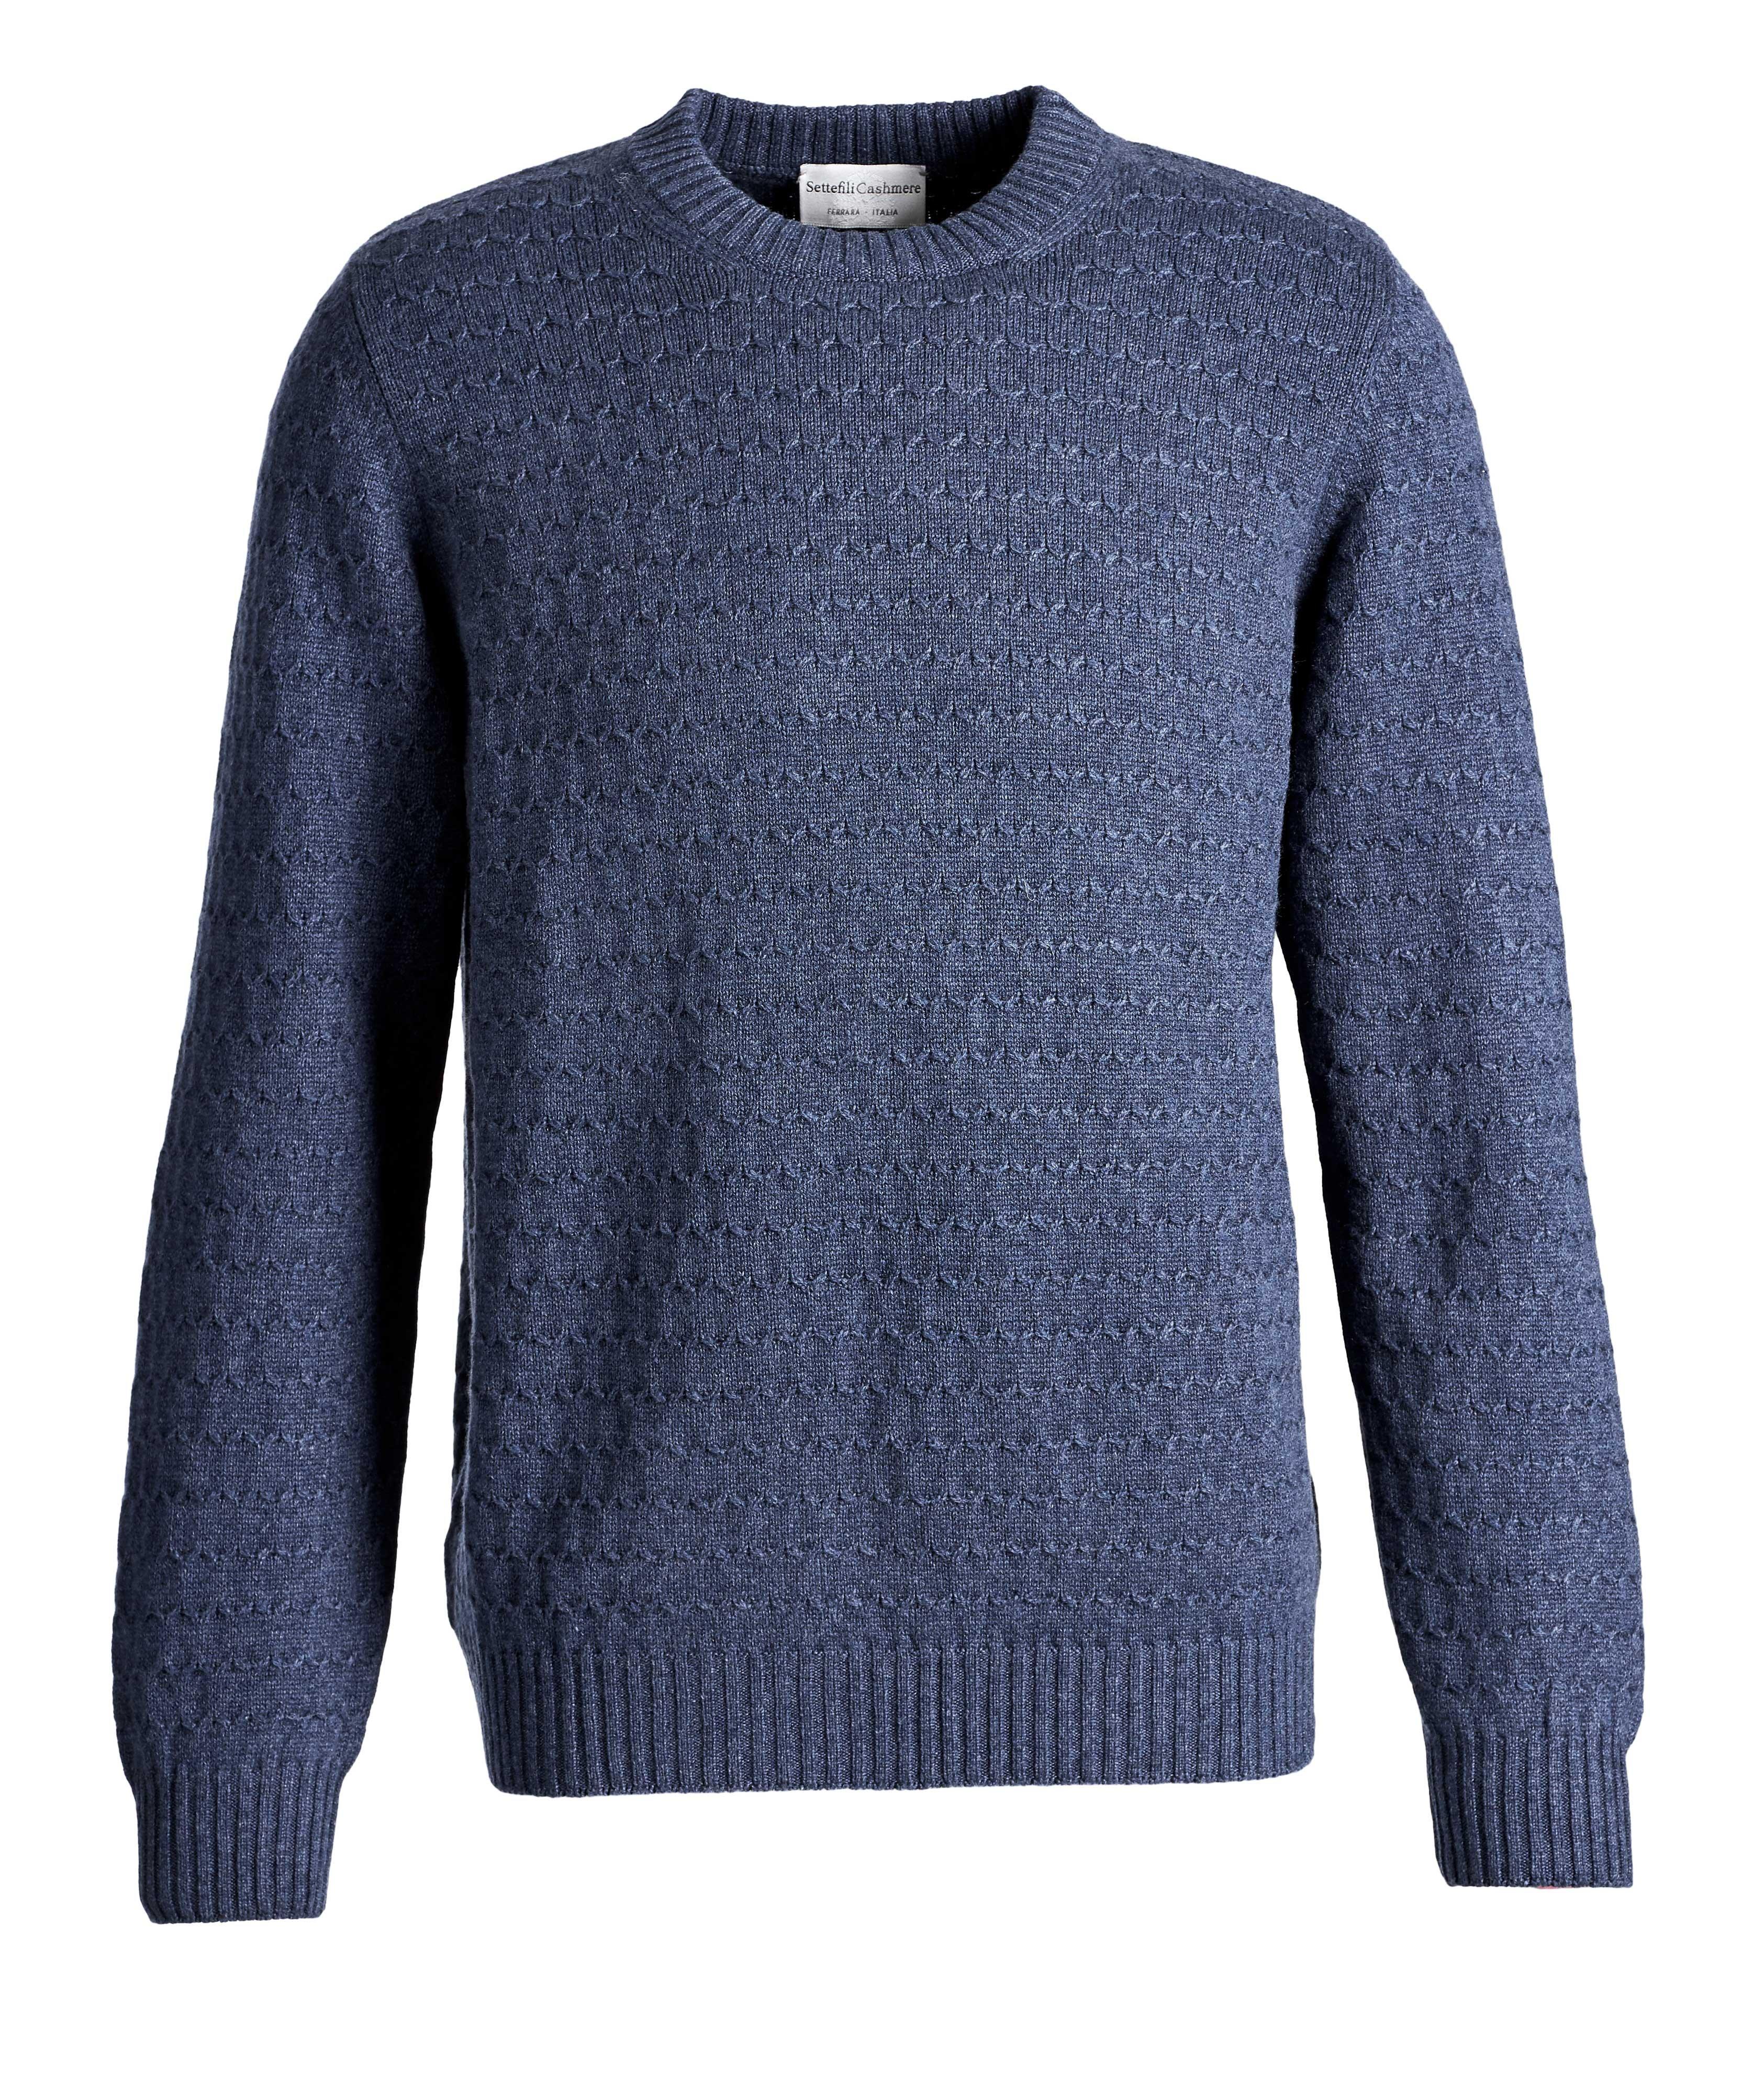 Textured Cashmere Sweater image 0